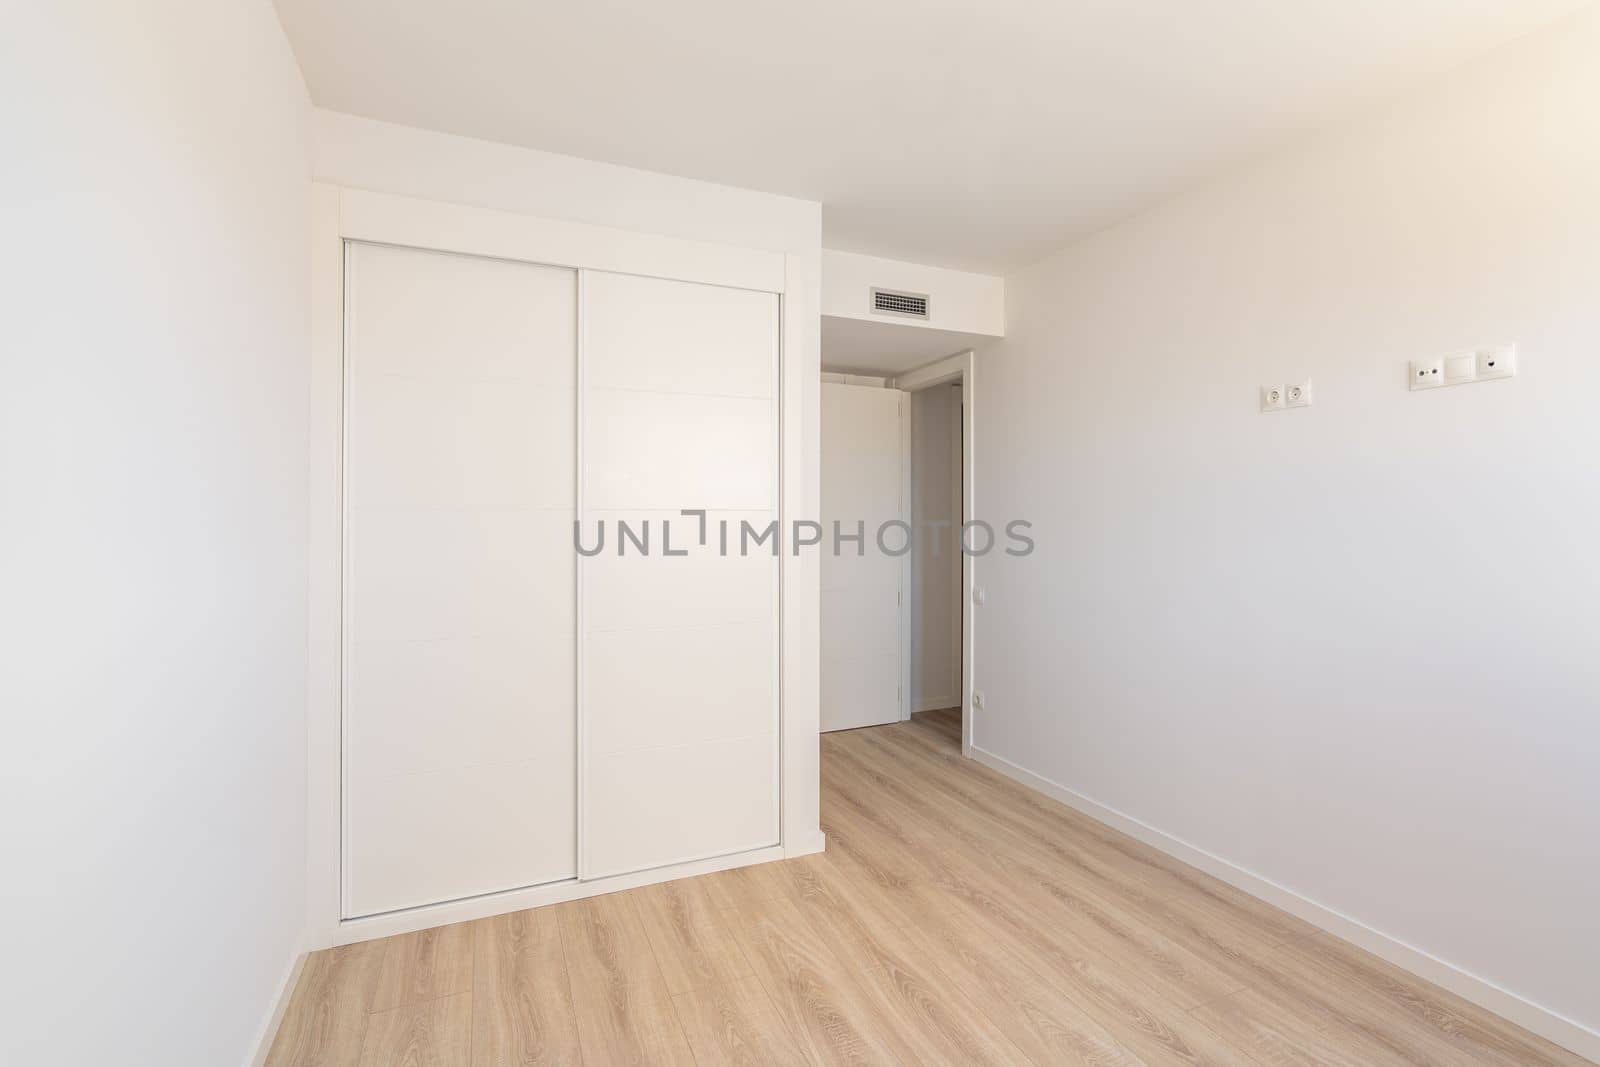 White empty sunny room with built-in wardrobe ventilation and two doors to the bathroom and exit. Concept of a new building or real estate for rent by apavlin